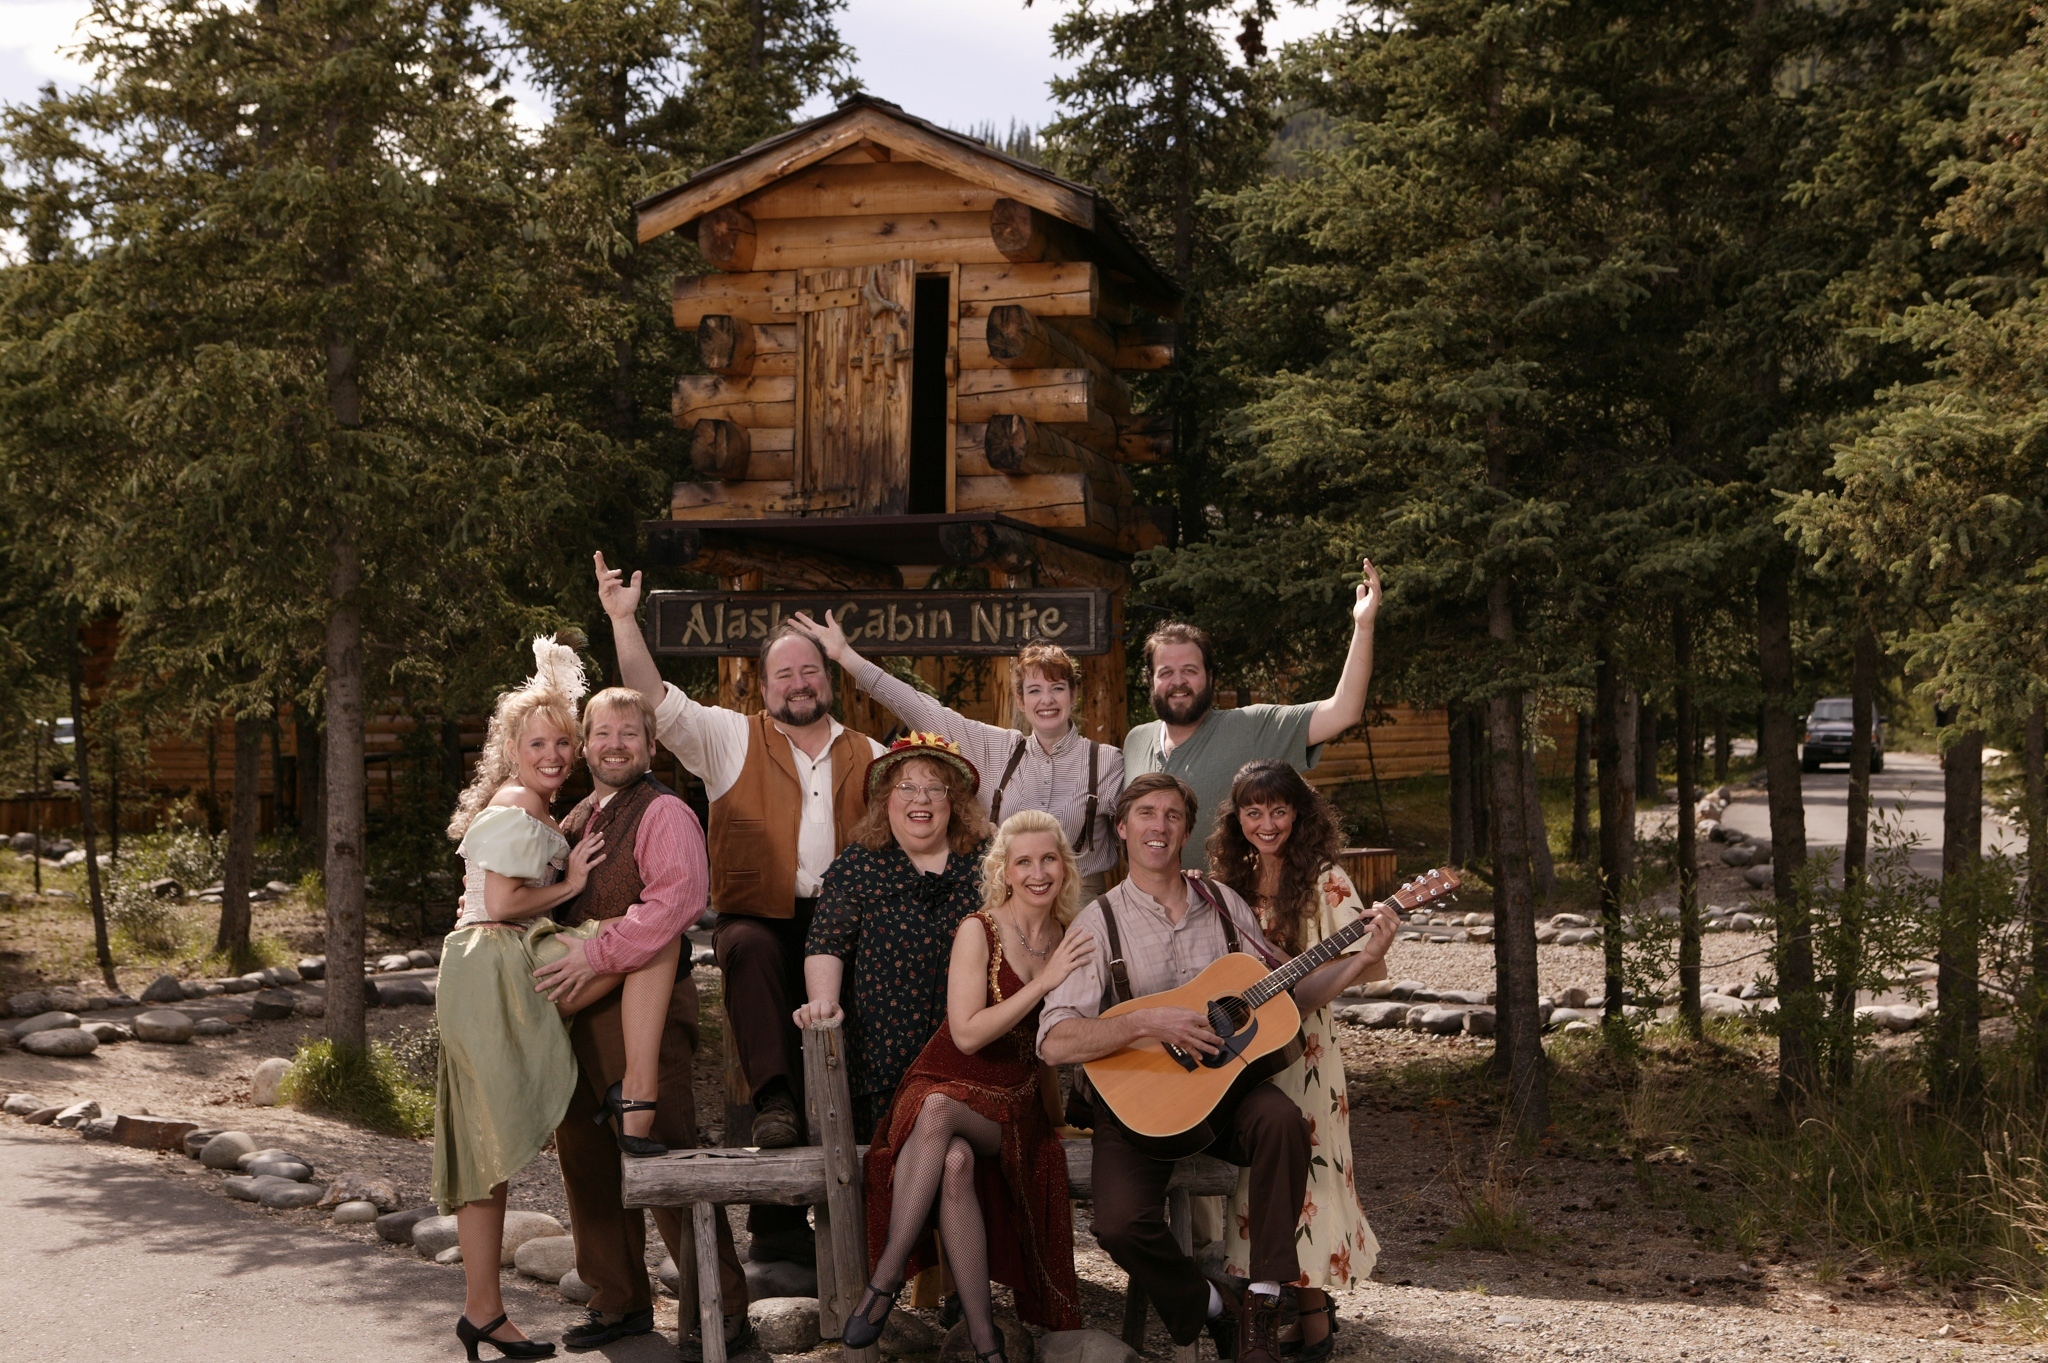 The Cast of the Cabin Nite Dinner Theater will educate and entertain!